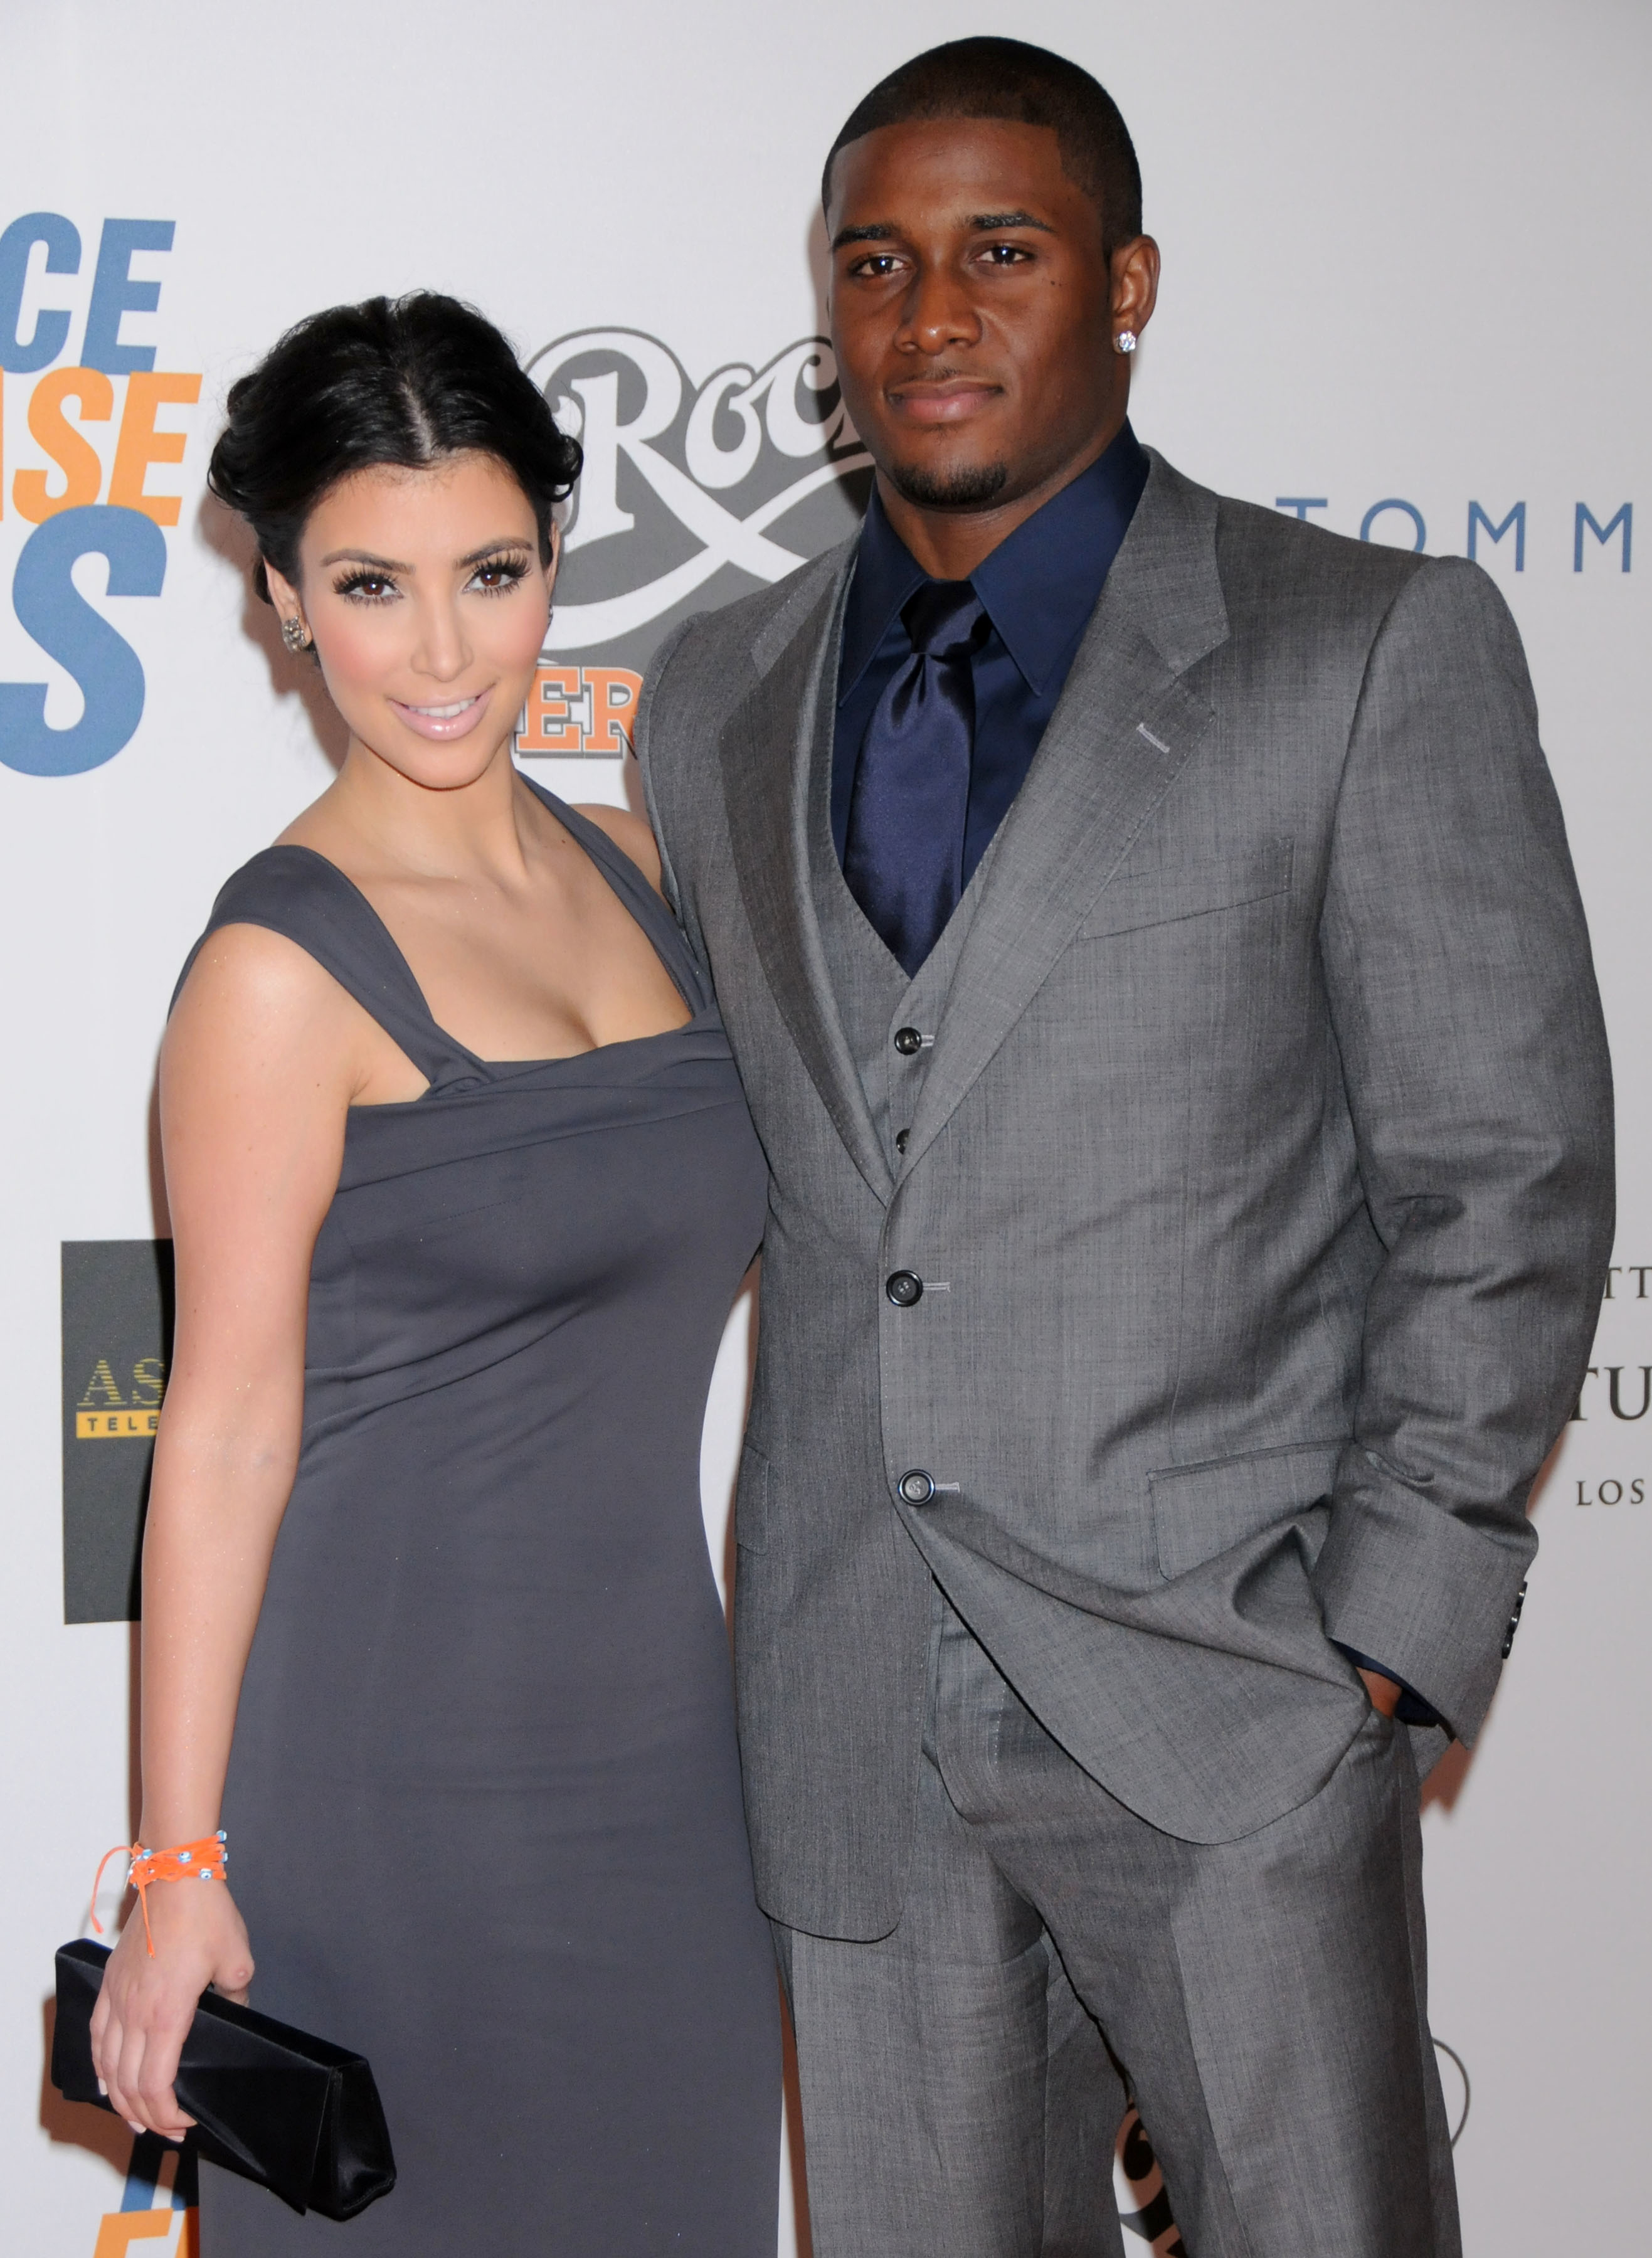 Kim and Reggie at a media event